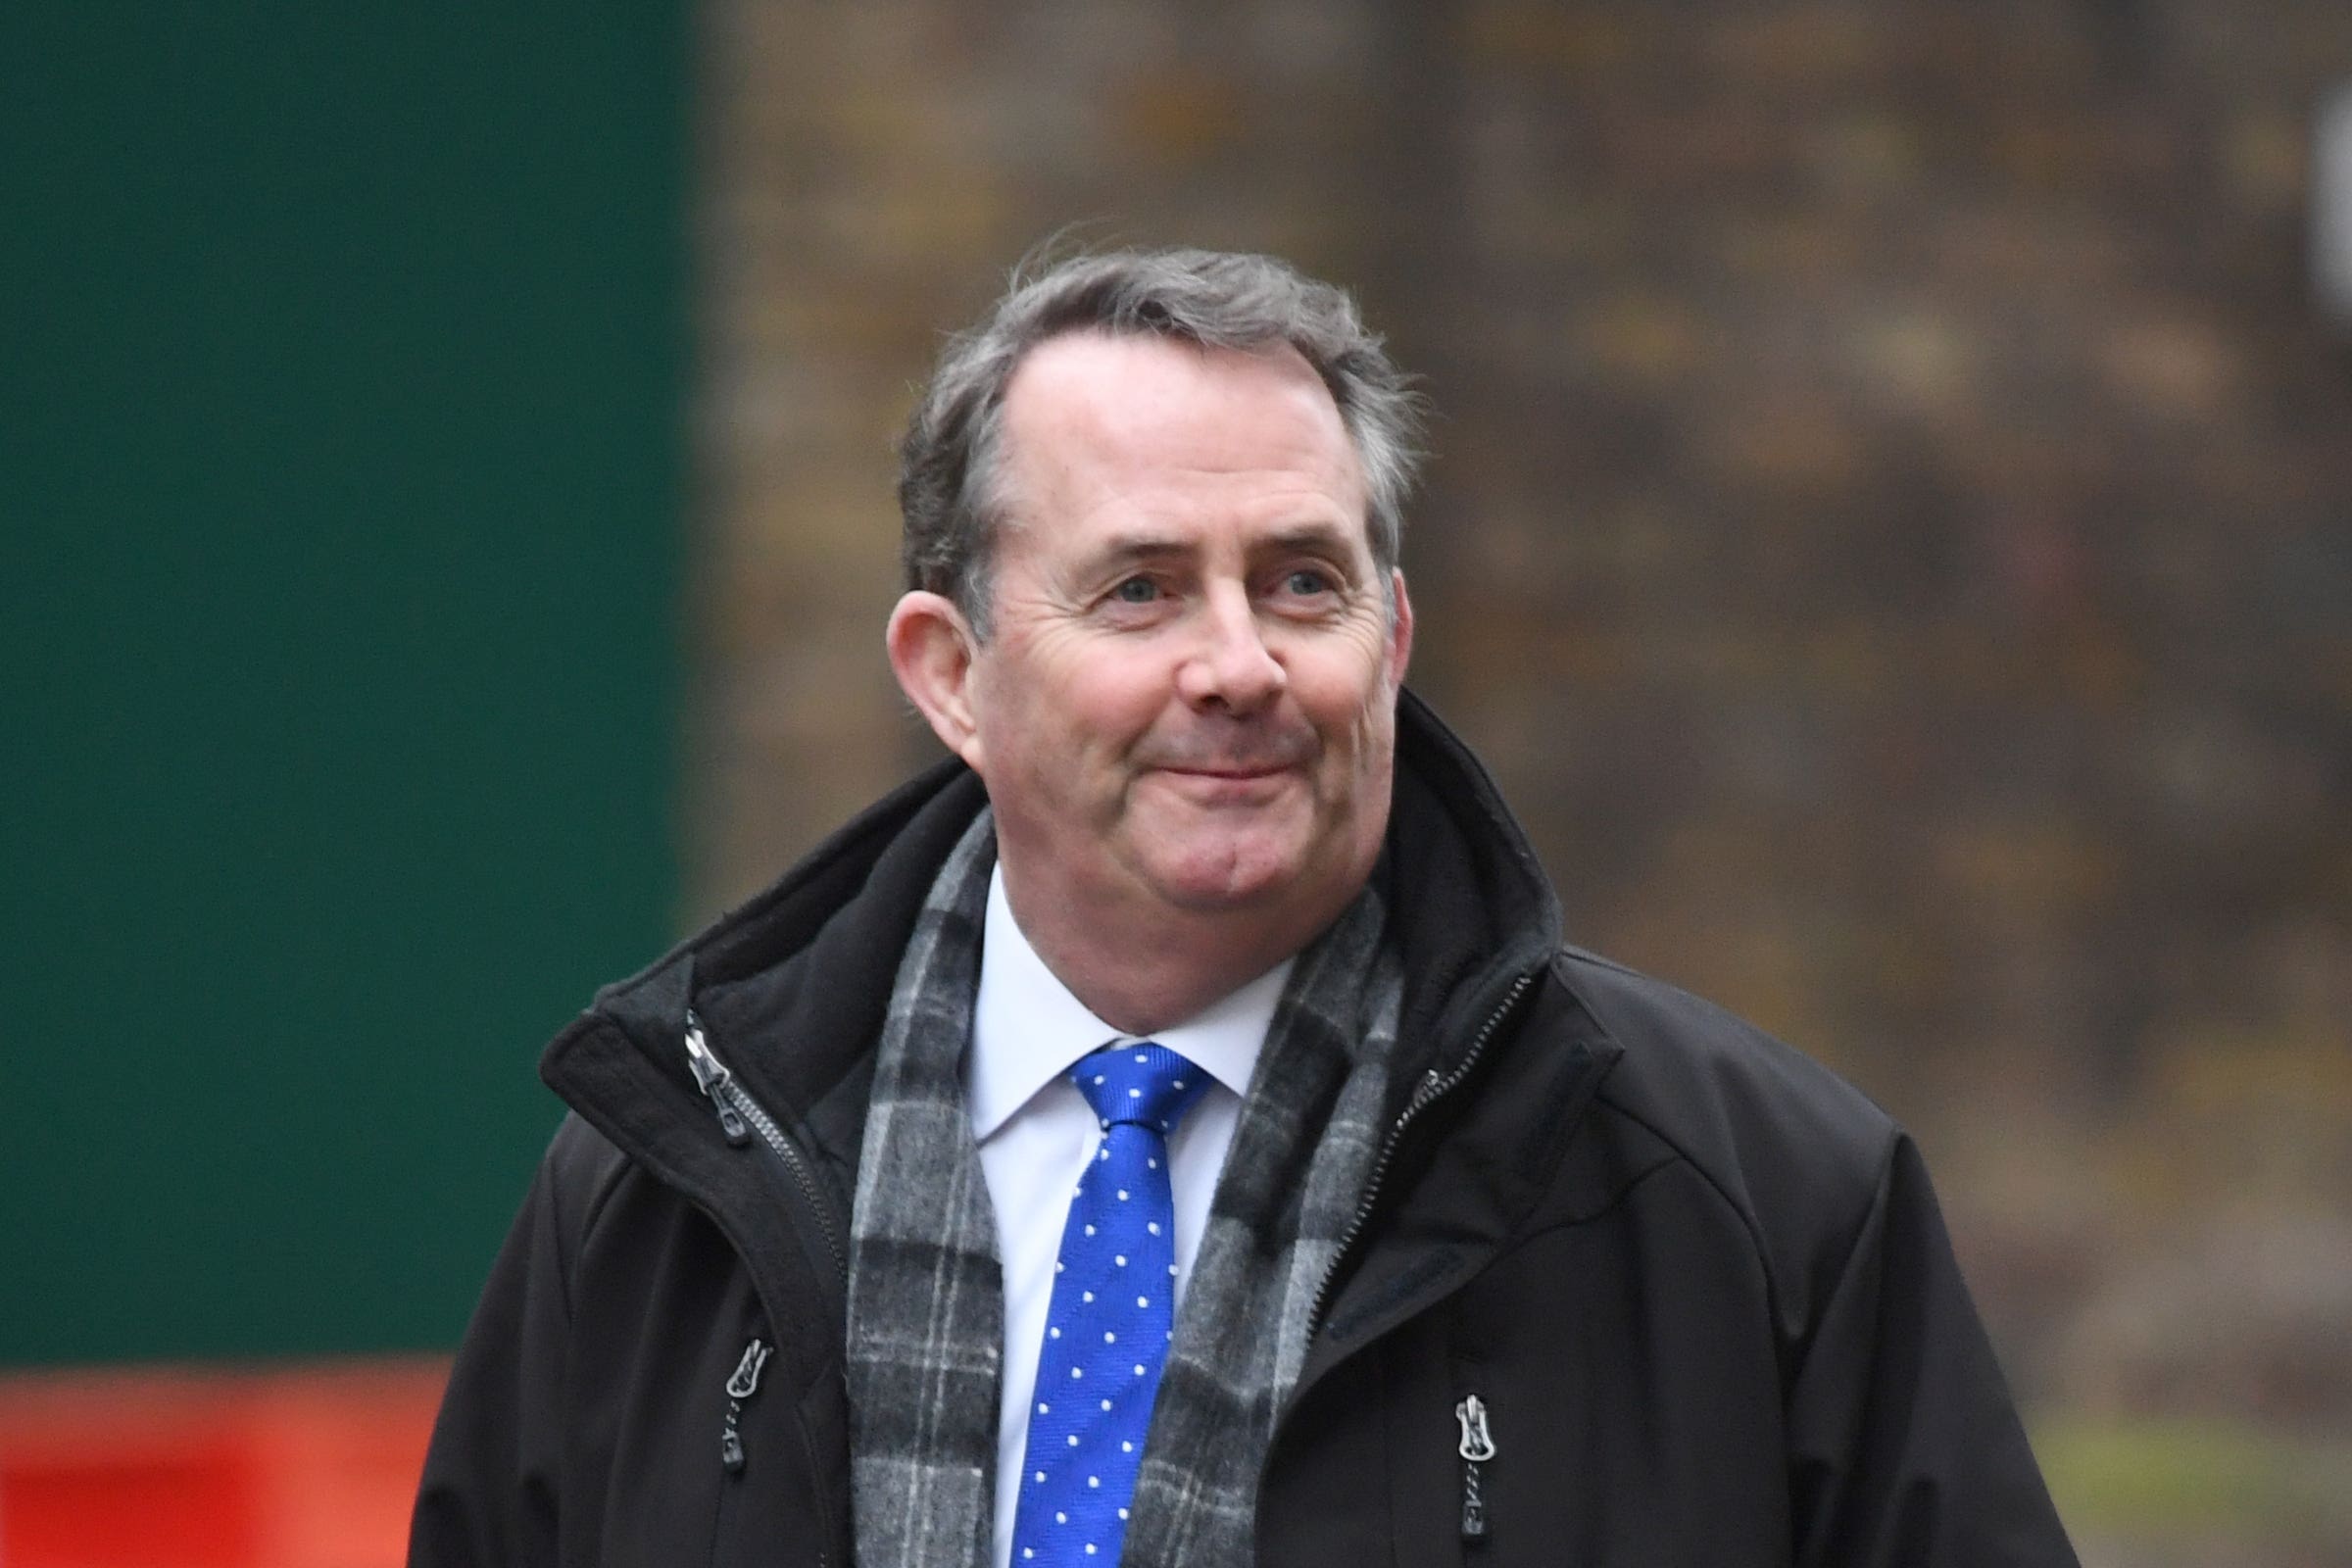 Dr Liam Fox has been out of government for four years